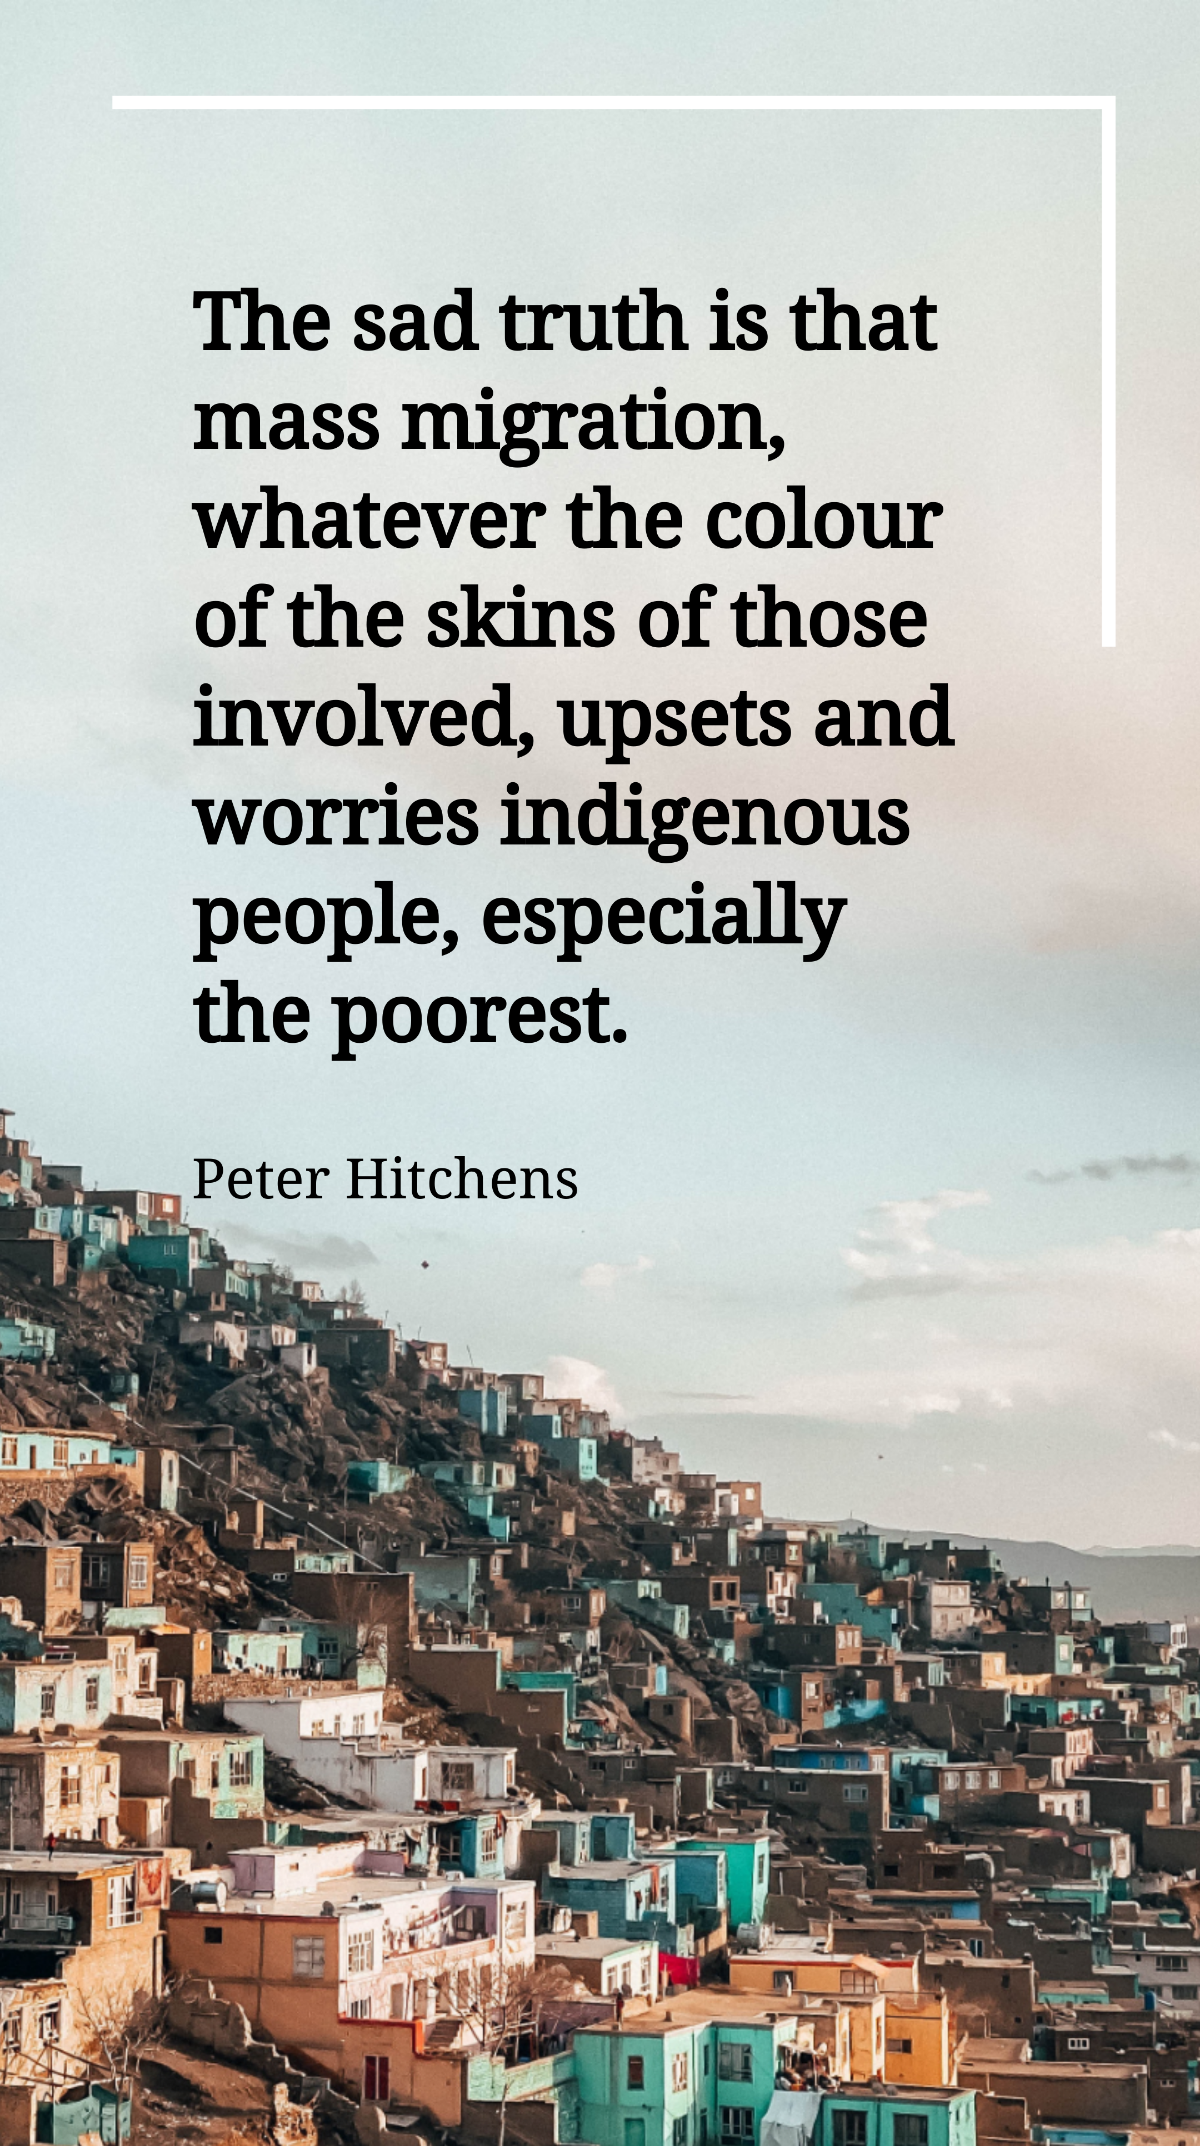 Peter Hitchens - The sad truth is that mass migration, whatever the colour of the skins of those involved, upsets and worries indigenous people, especially the poorest. Template